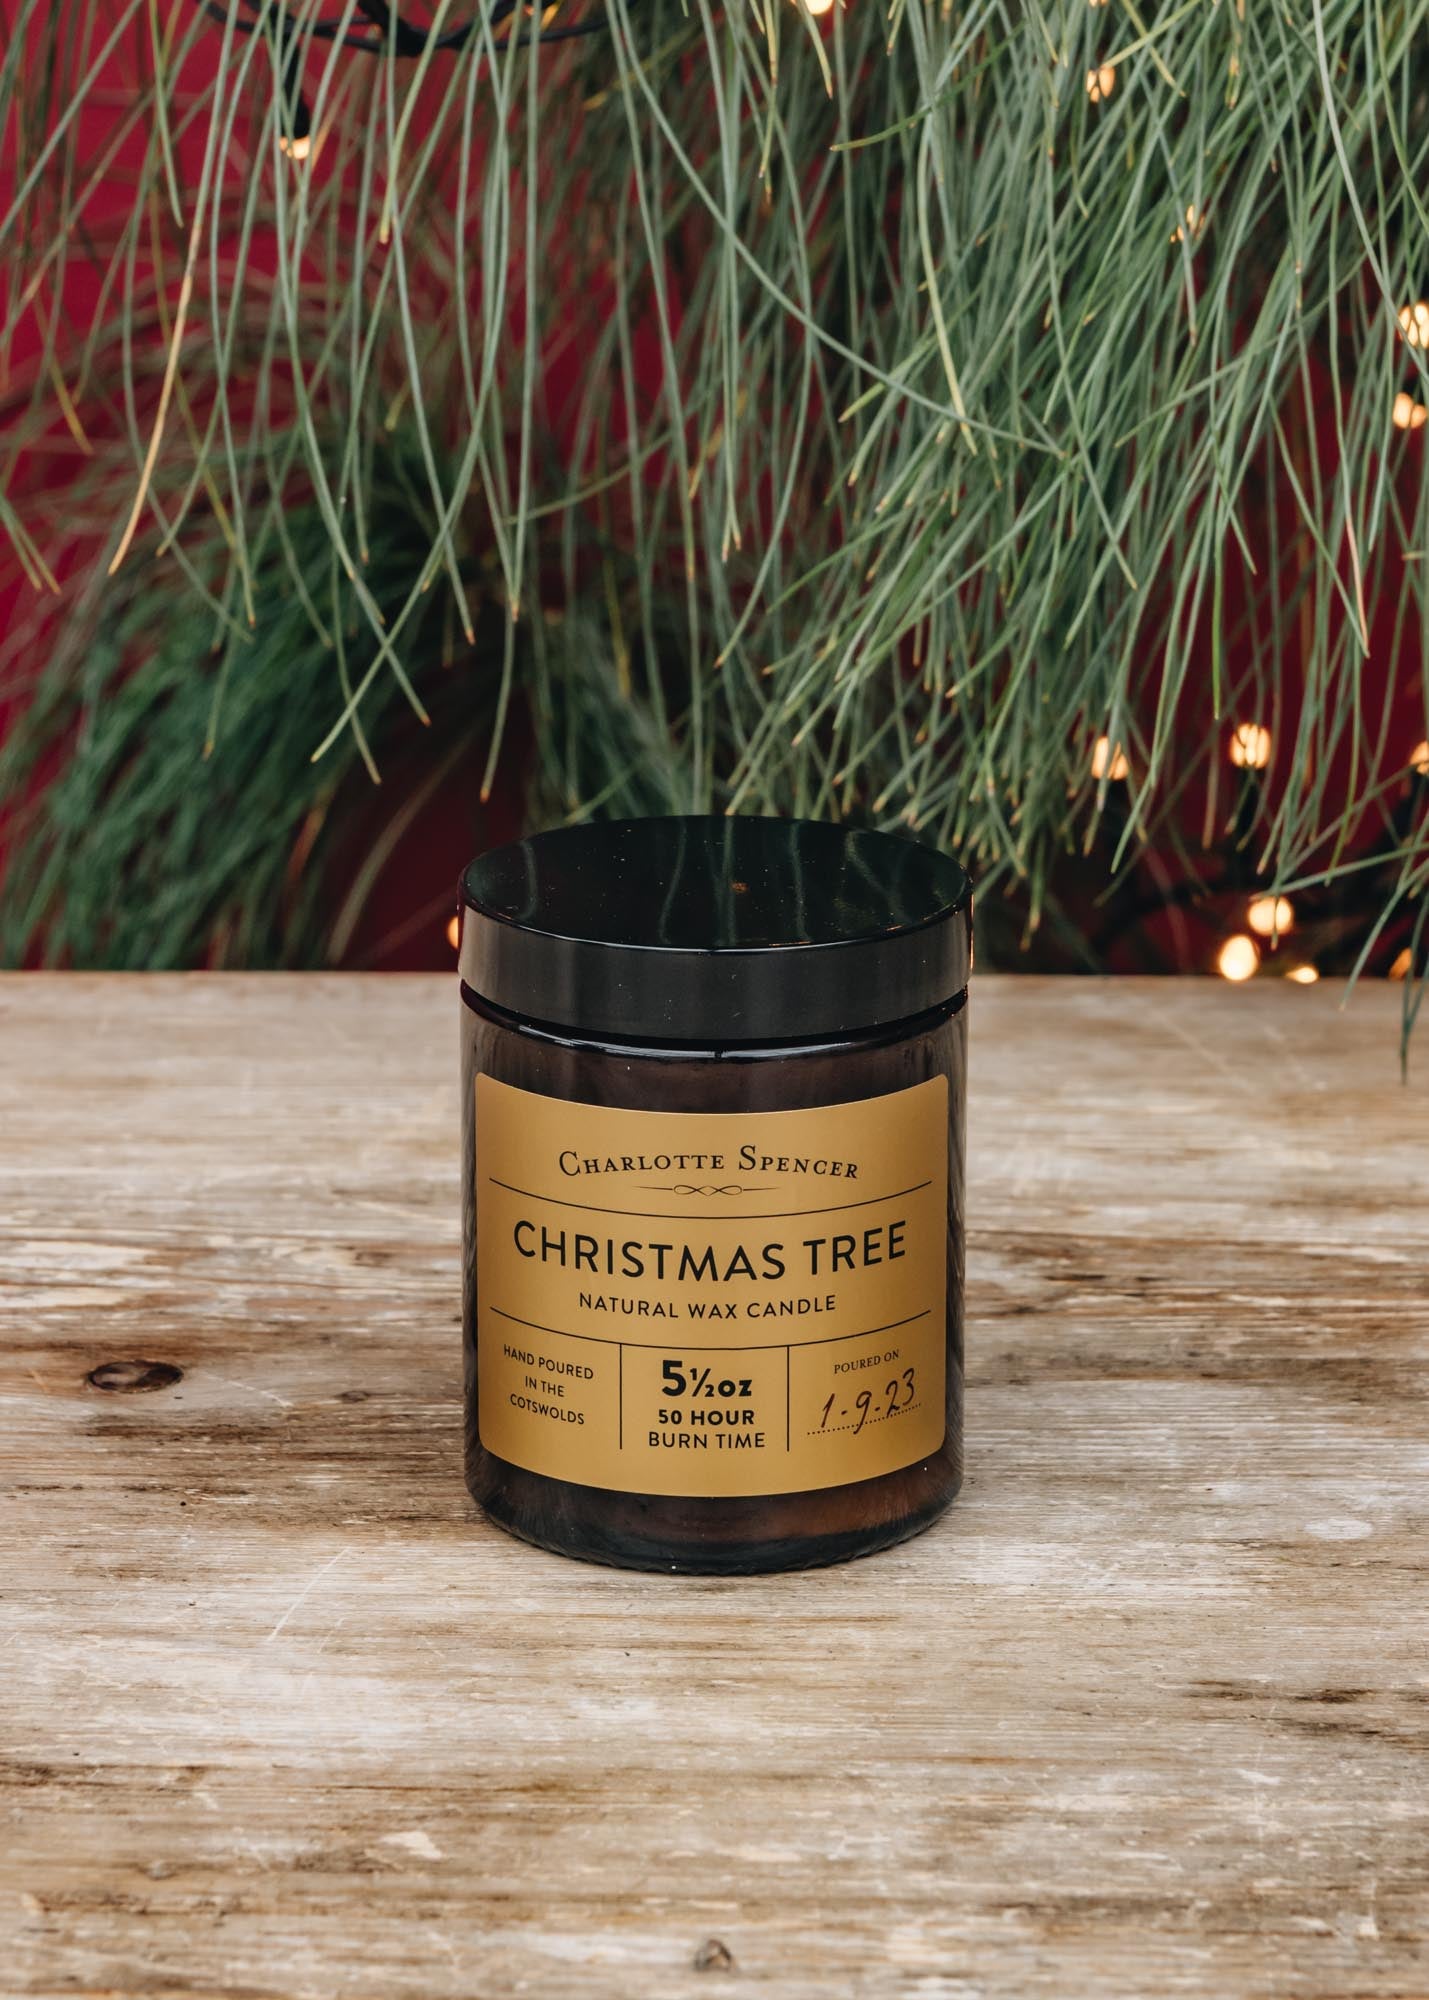 Charlotte Spencer Scented Candle in Christmas Tree, 5.5oz